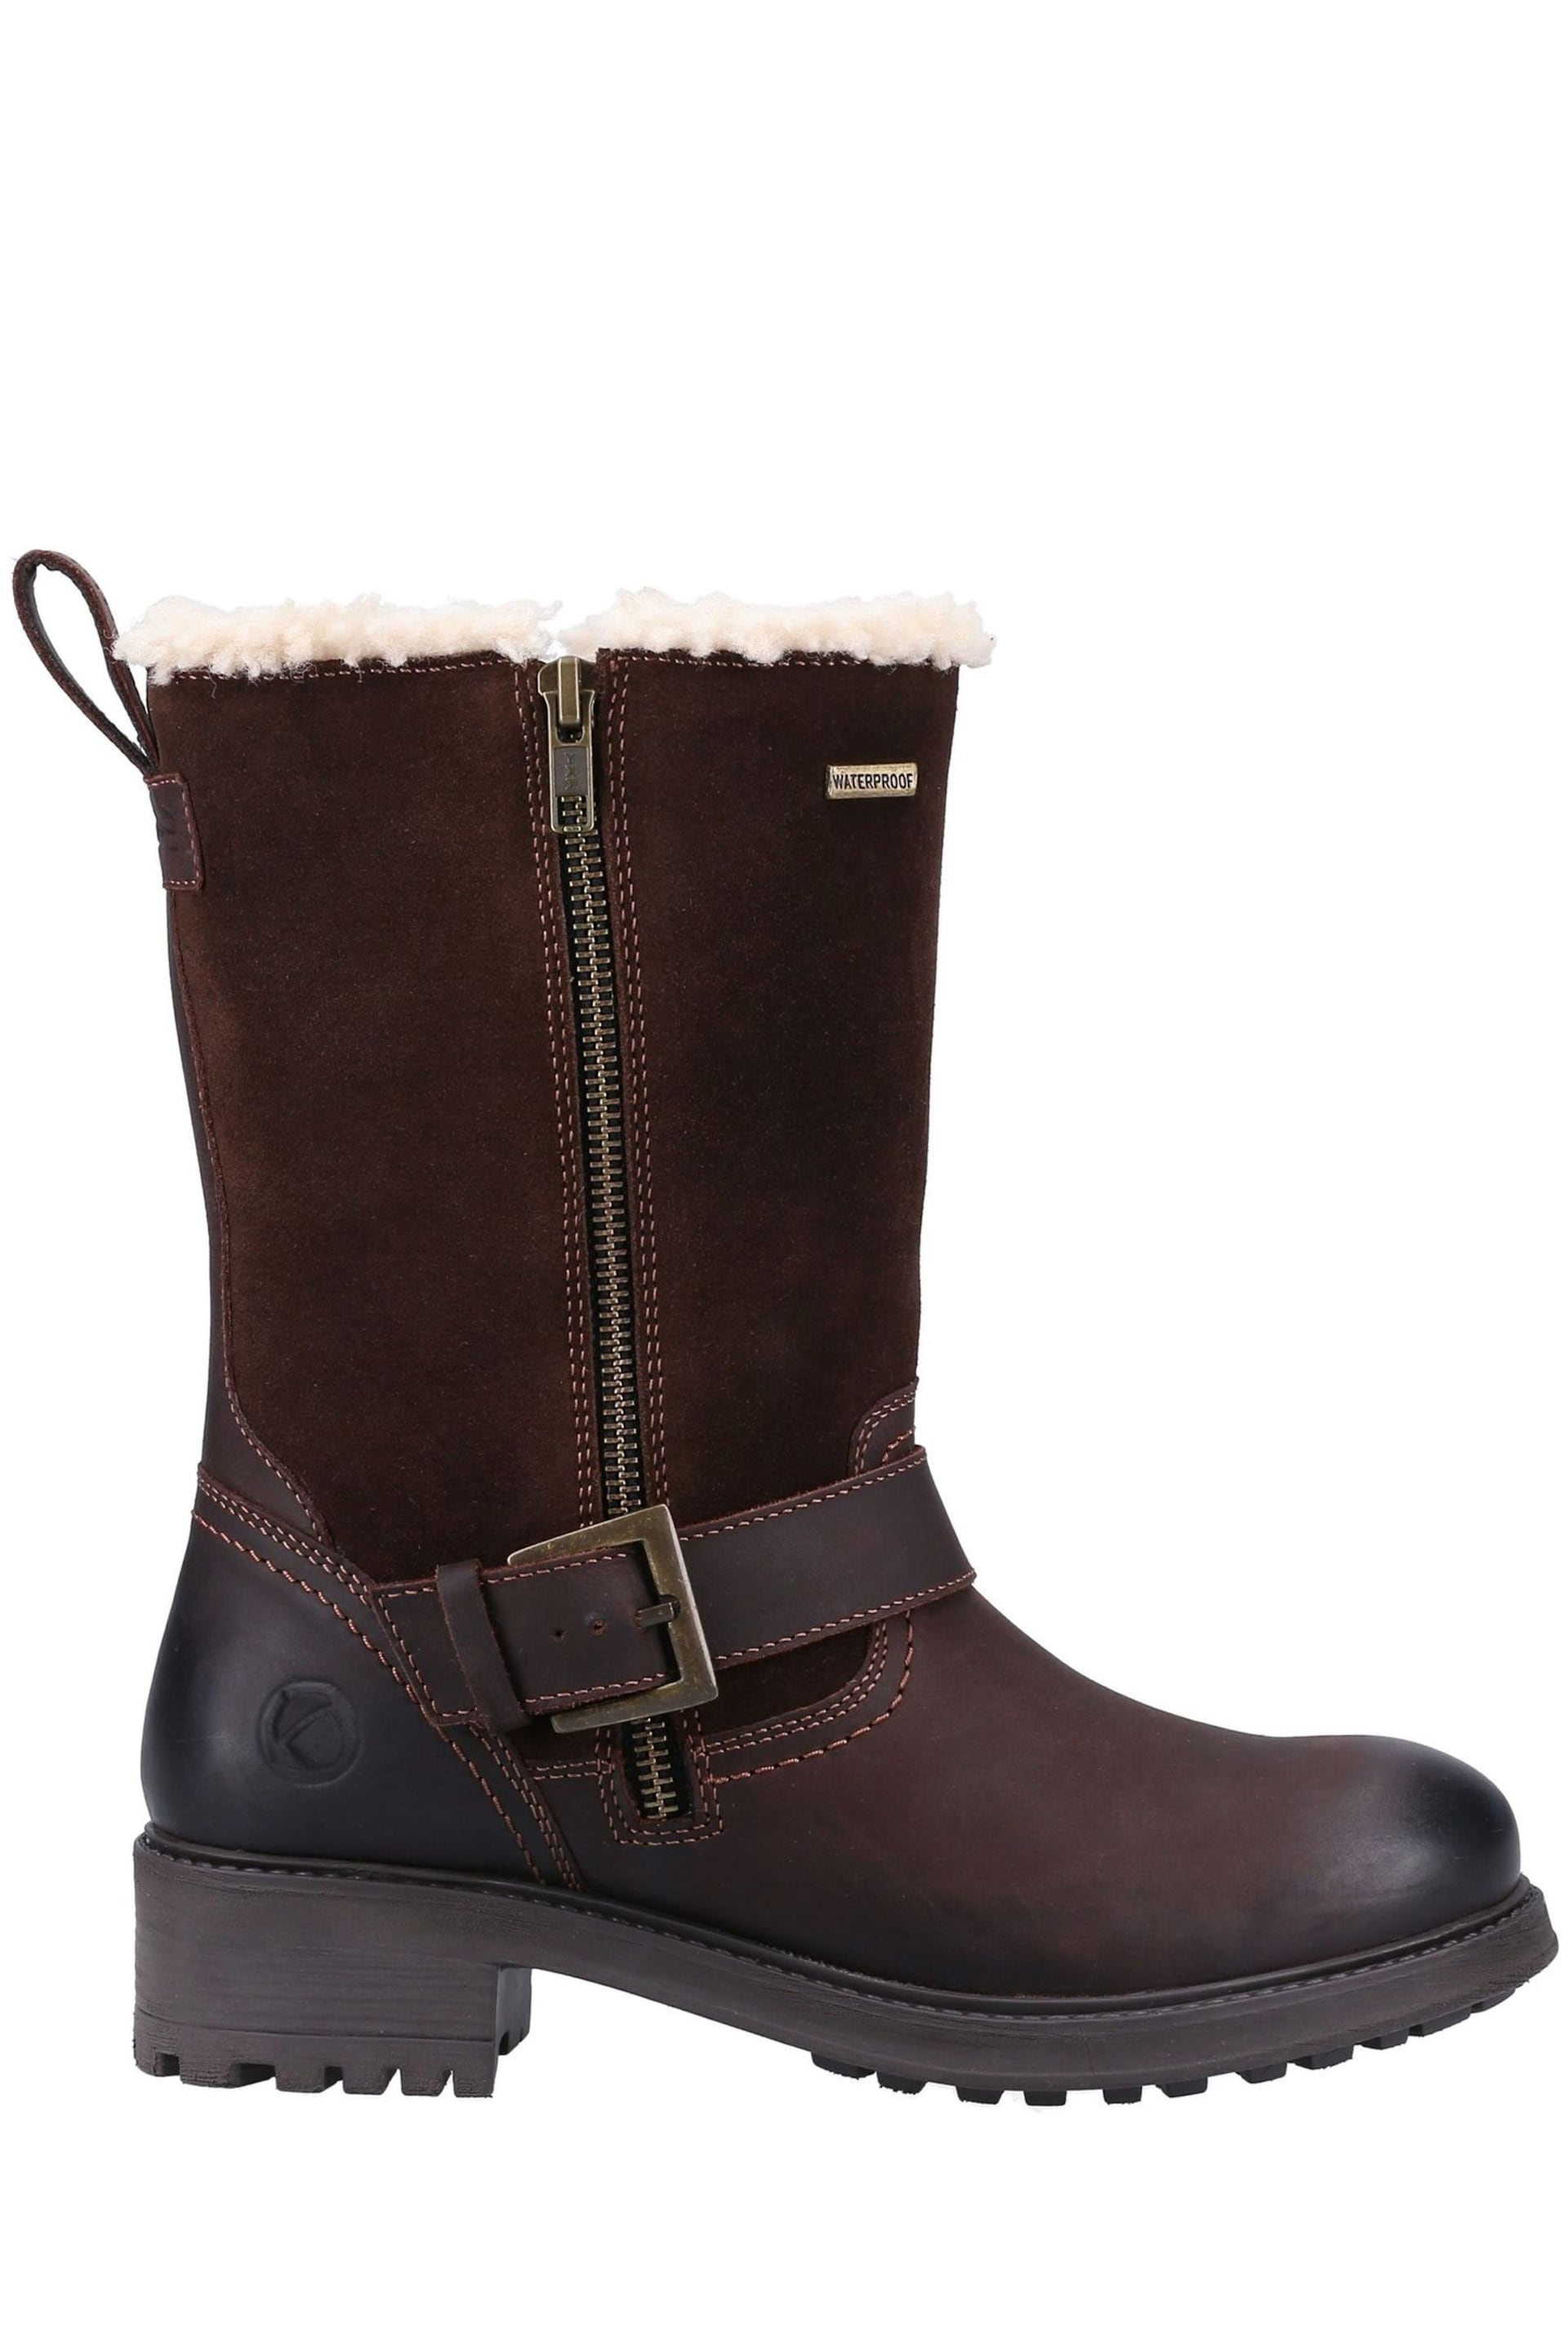 Cotswolds Alverton Brown Boots - Image 3 of 4